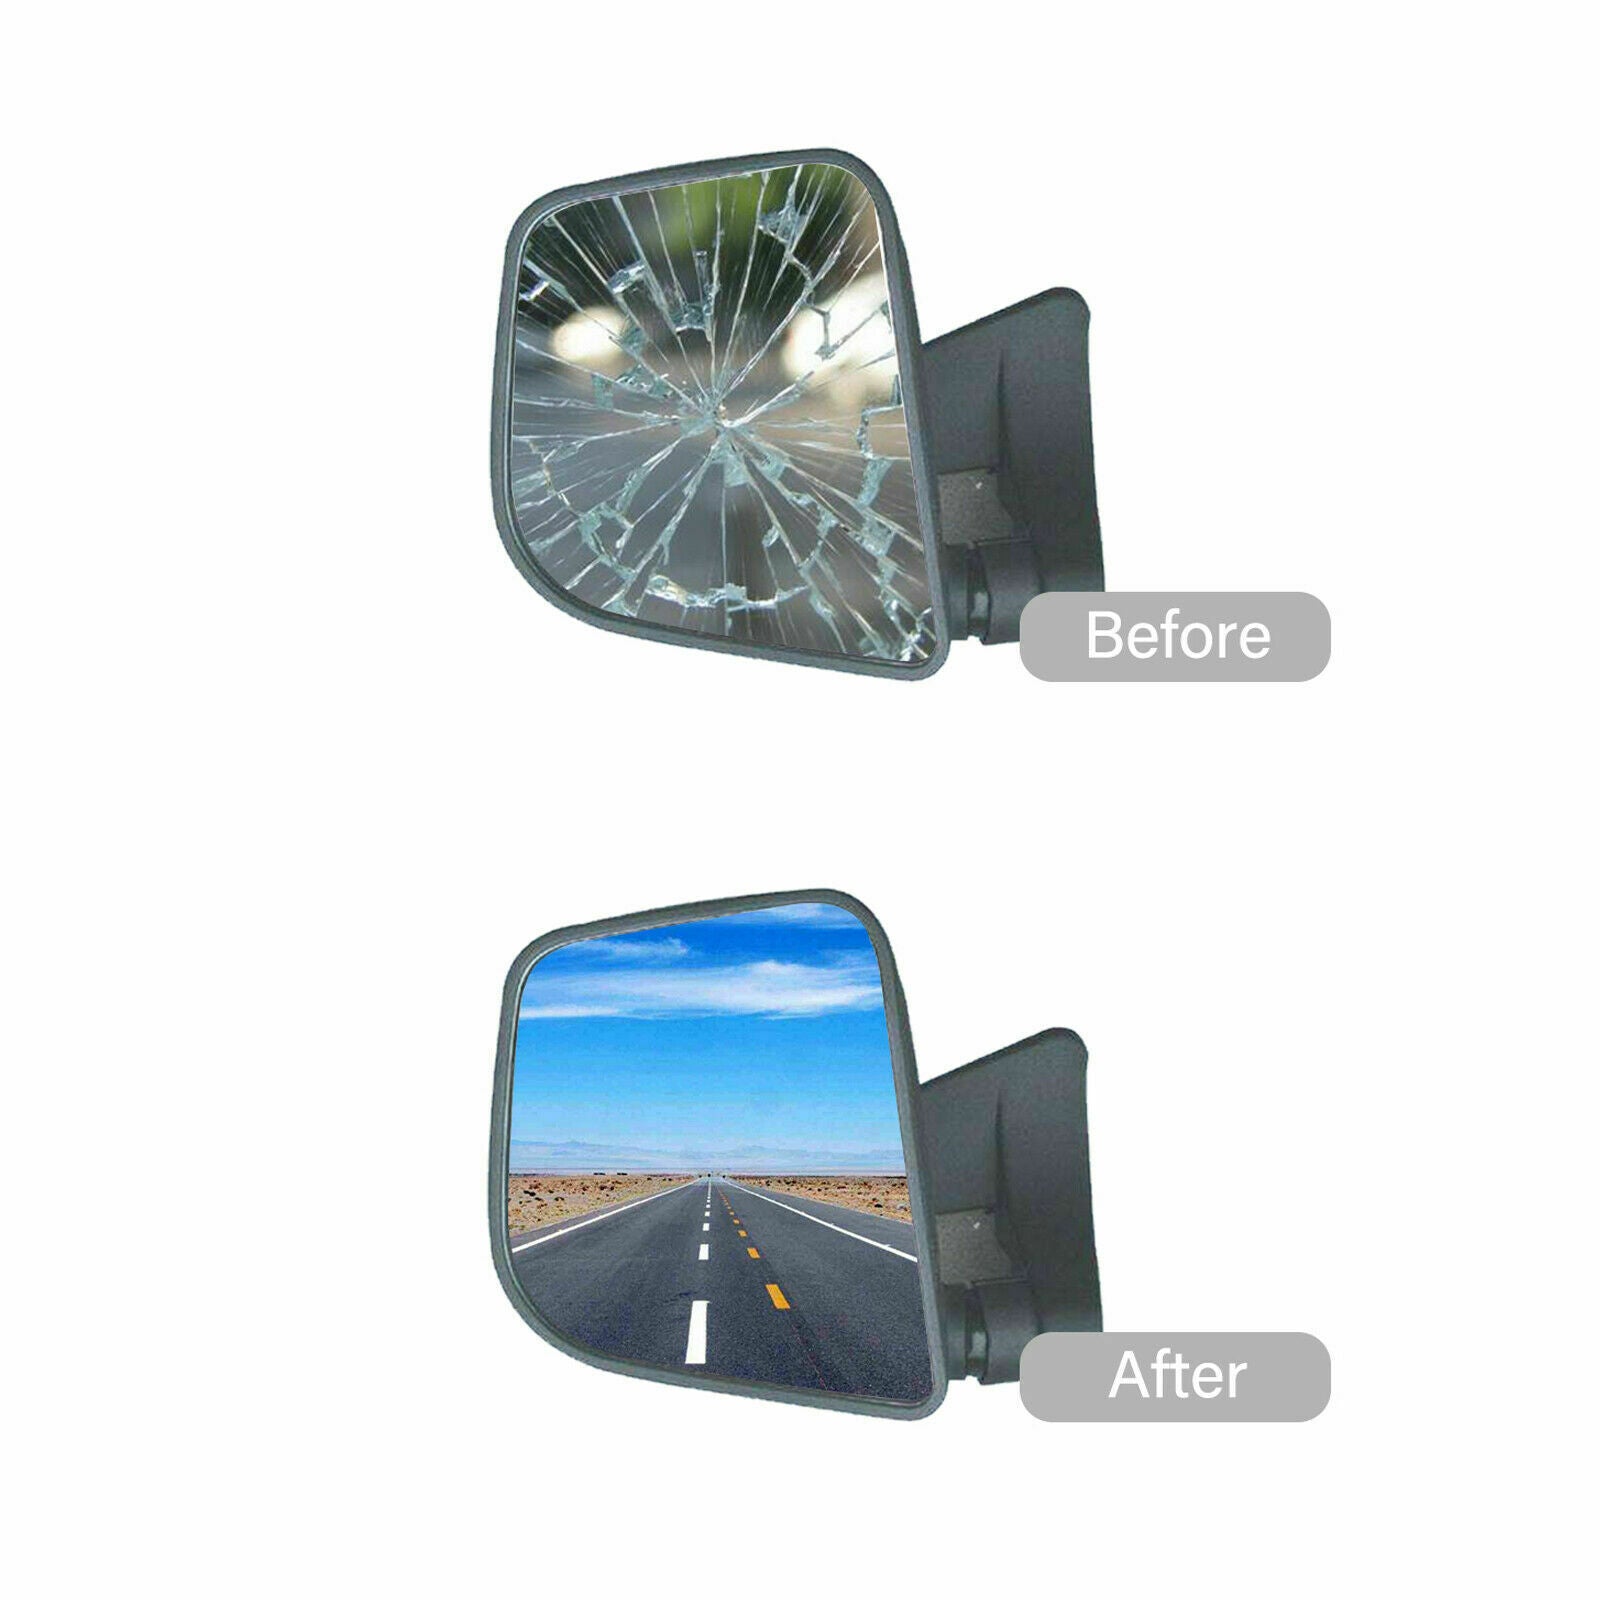 WLLW Replacement Mirror Glass for Lexus 2010-2015 RX350/RX450H, Driver Left Side LH/Passenger Right Side RH/The Both Sides Flat Convex M-0068